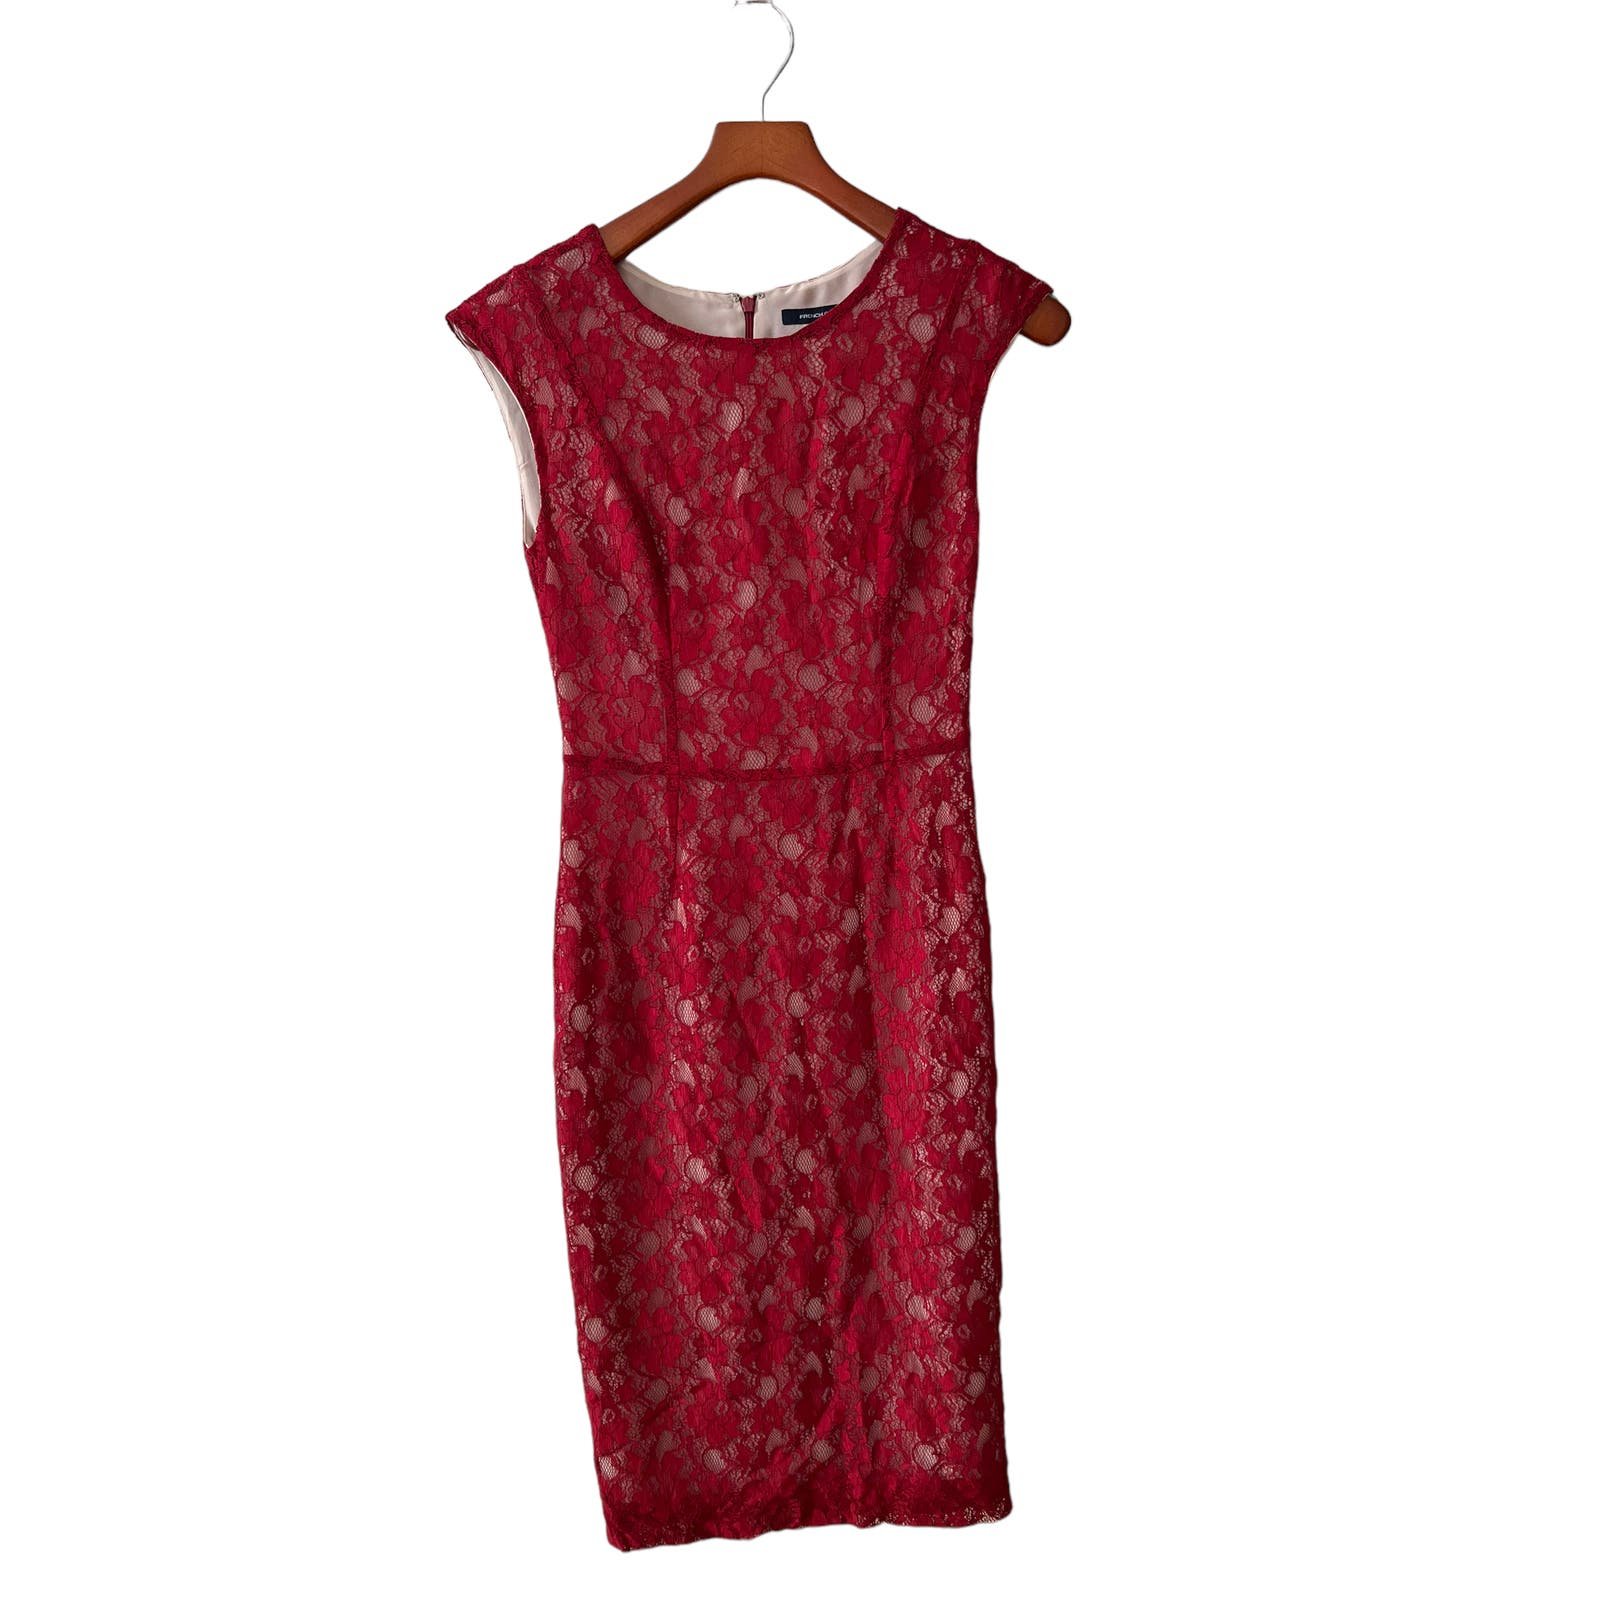 Gorgeous French Connection Red Lace Pencil Dress 2 NGZQ